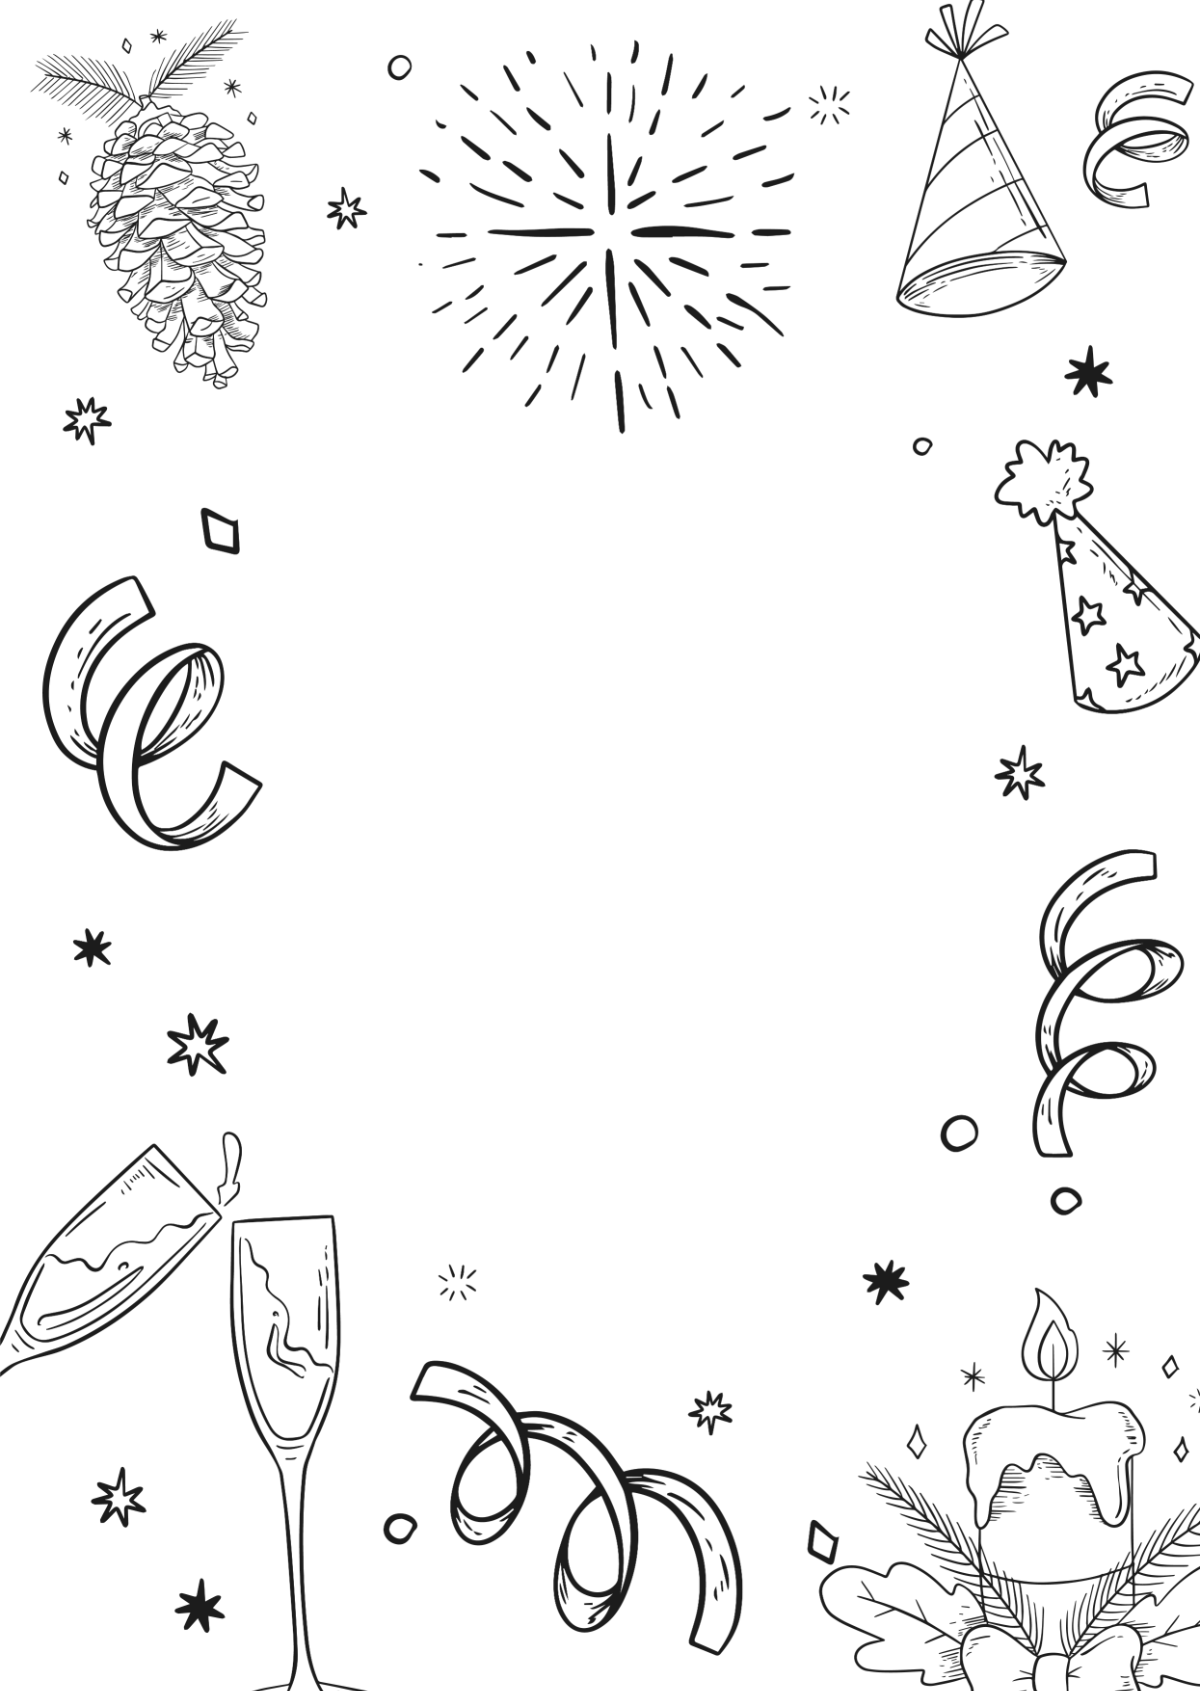 2020 doodles horizontal illustration. New Year objects and elements poster  Stock Photo by ©3dsparrow 298127094